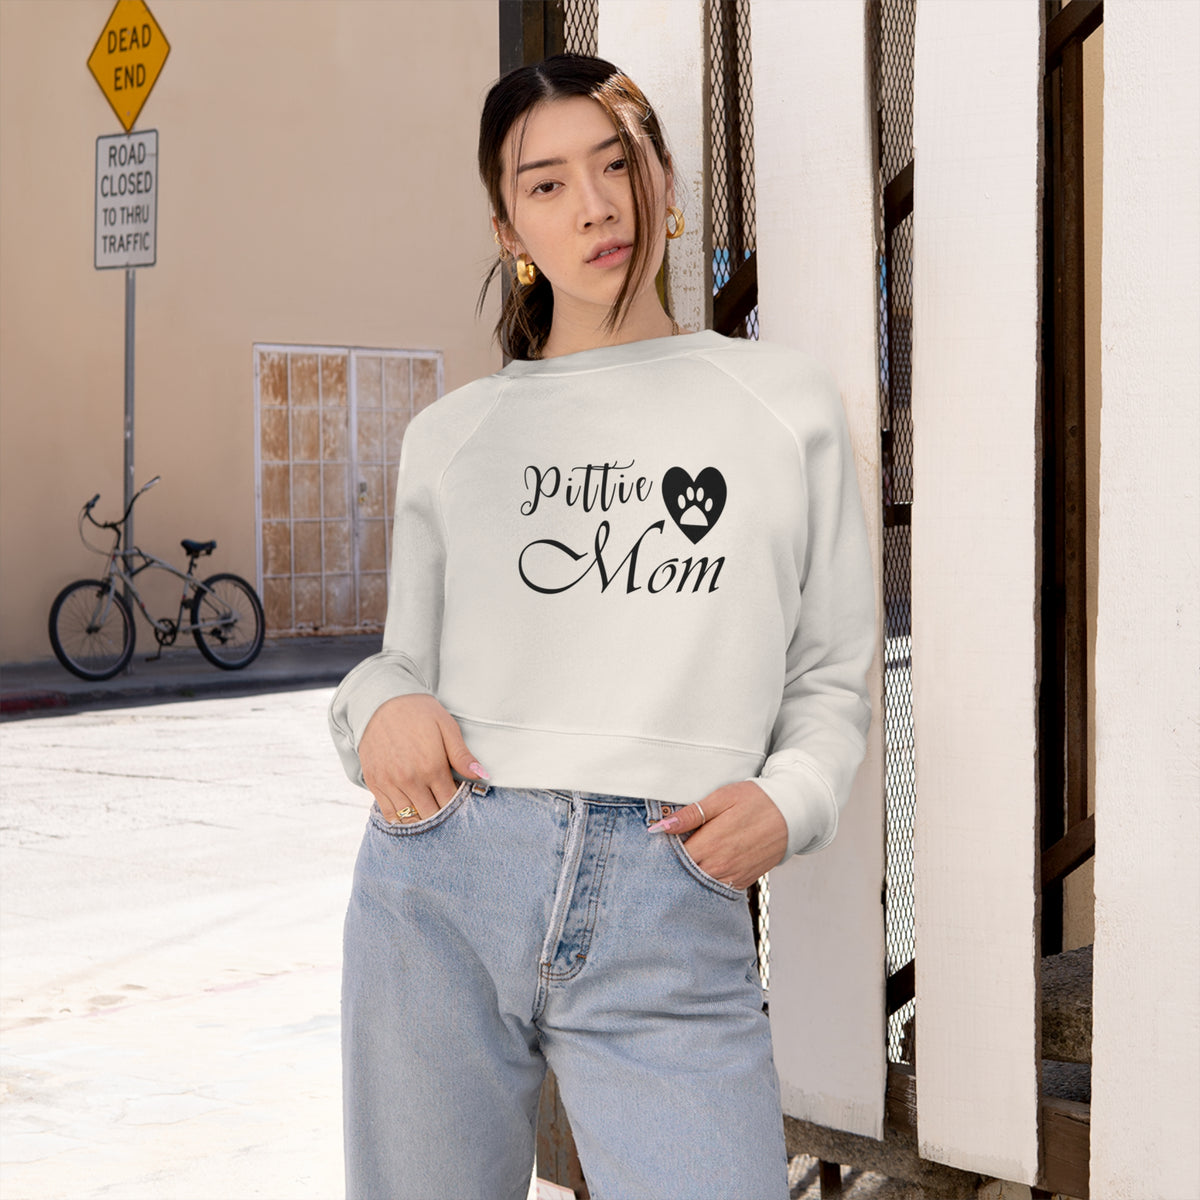 Pittie Mom Women's Cropped Pullover